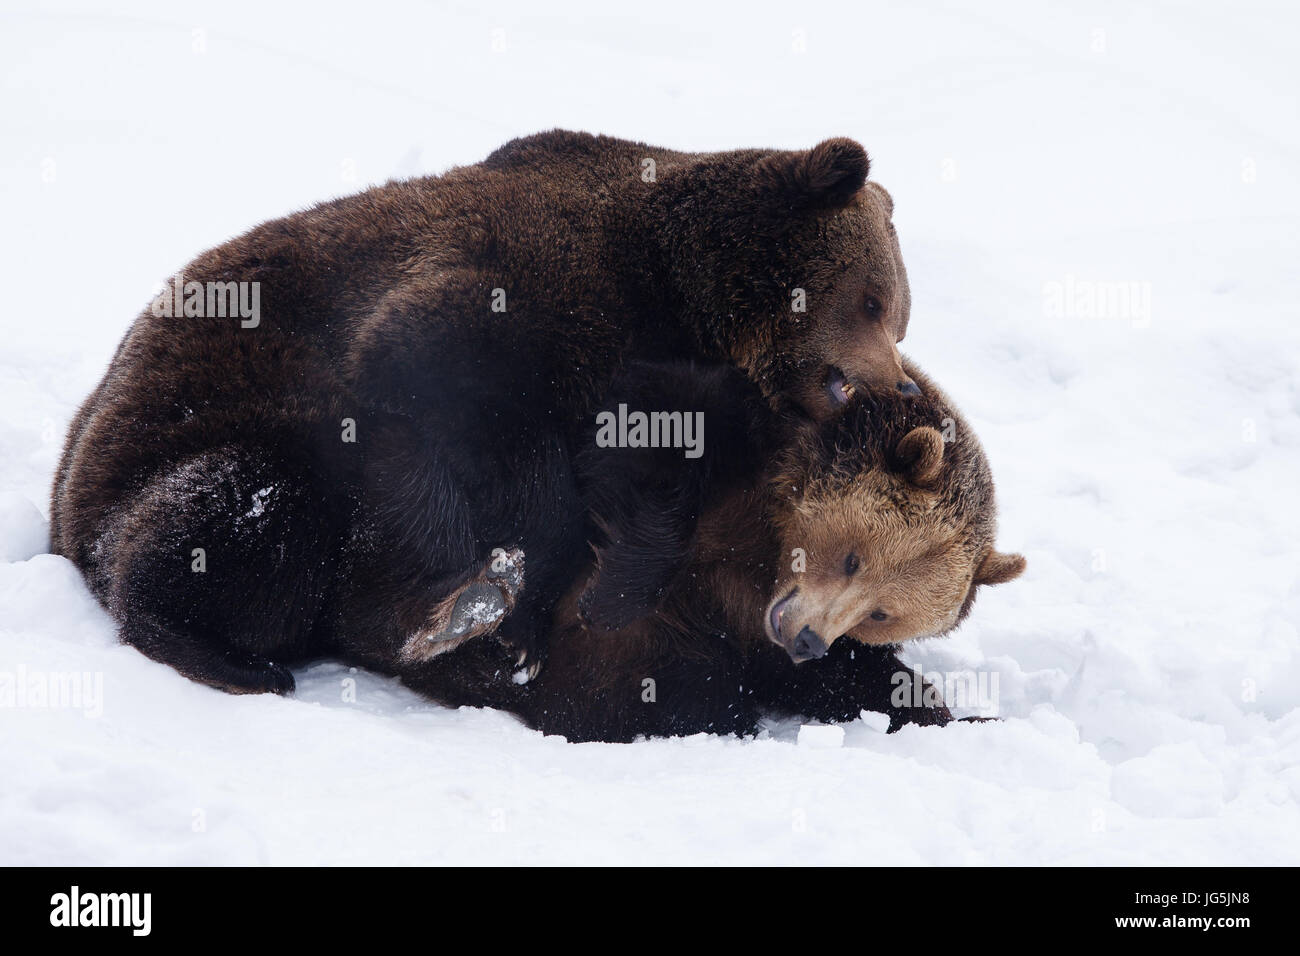 Two brown bears (Ursus arctos) in the snow, battle, captive, Bavaria, Germany Stock Photo